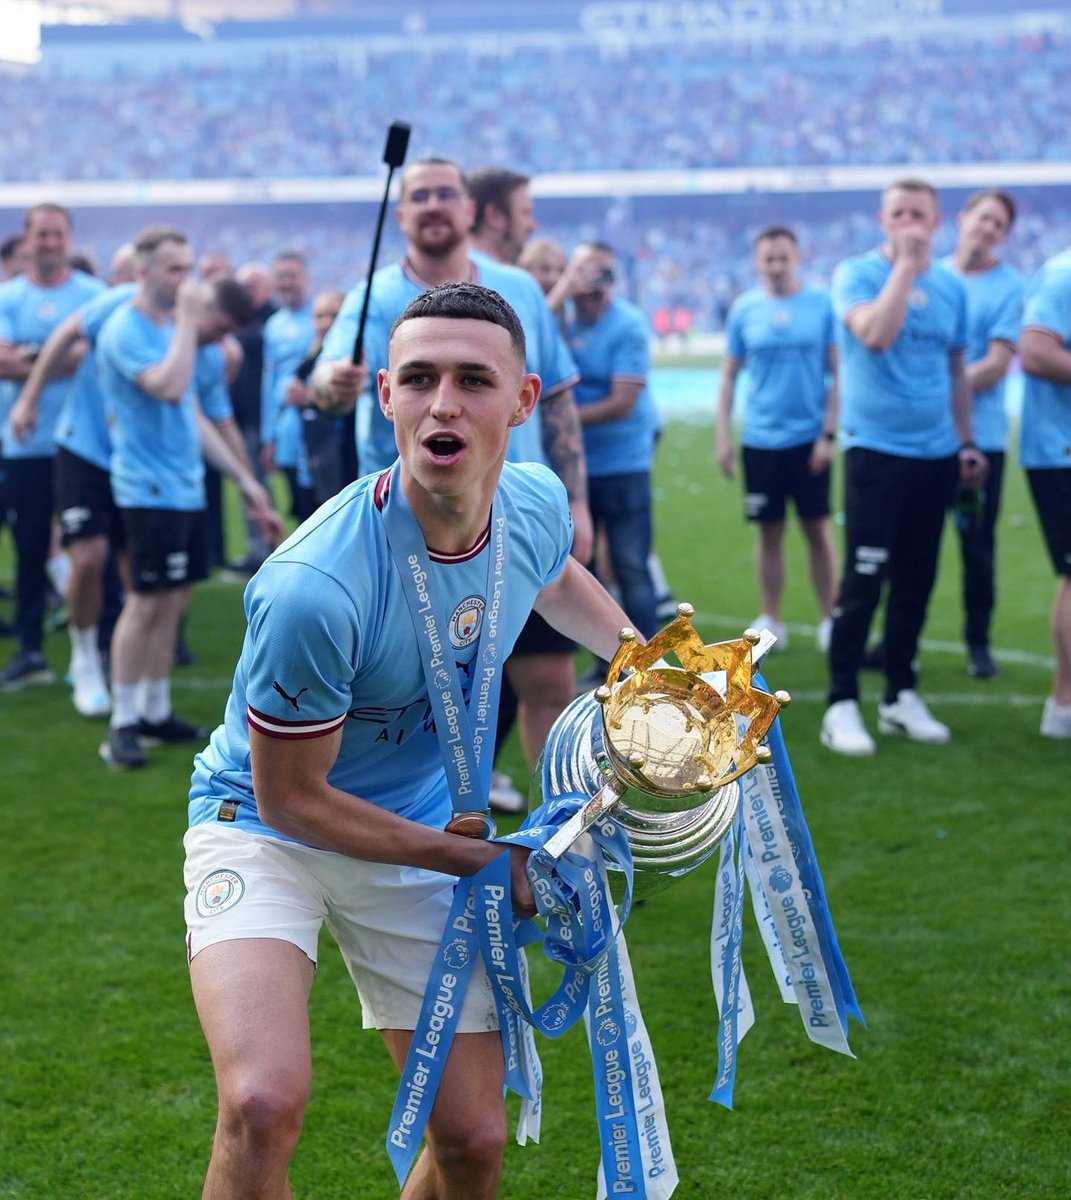 🤯 @PhilFoden has reached 100 #PL wins quicker than any player in the League’s history, via @Squawka:

👕 127 games
✅ 100 wins
⚽️ 34 goals
🤝 18 assists
🏆 5 titles

He is 22.